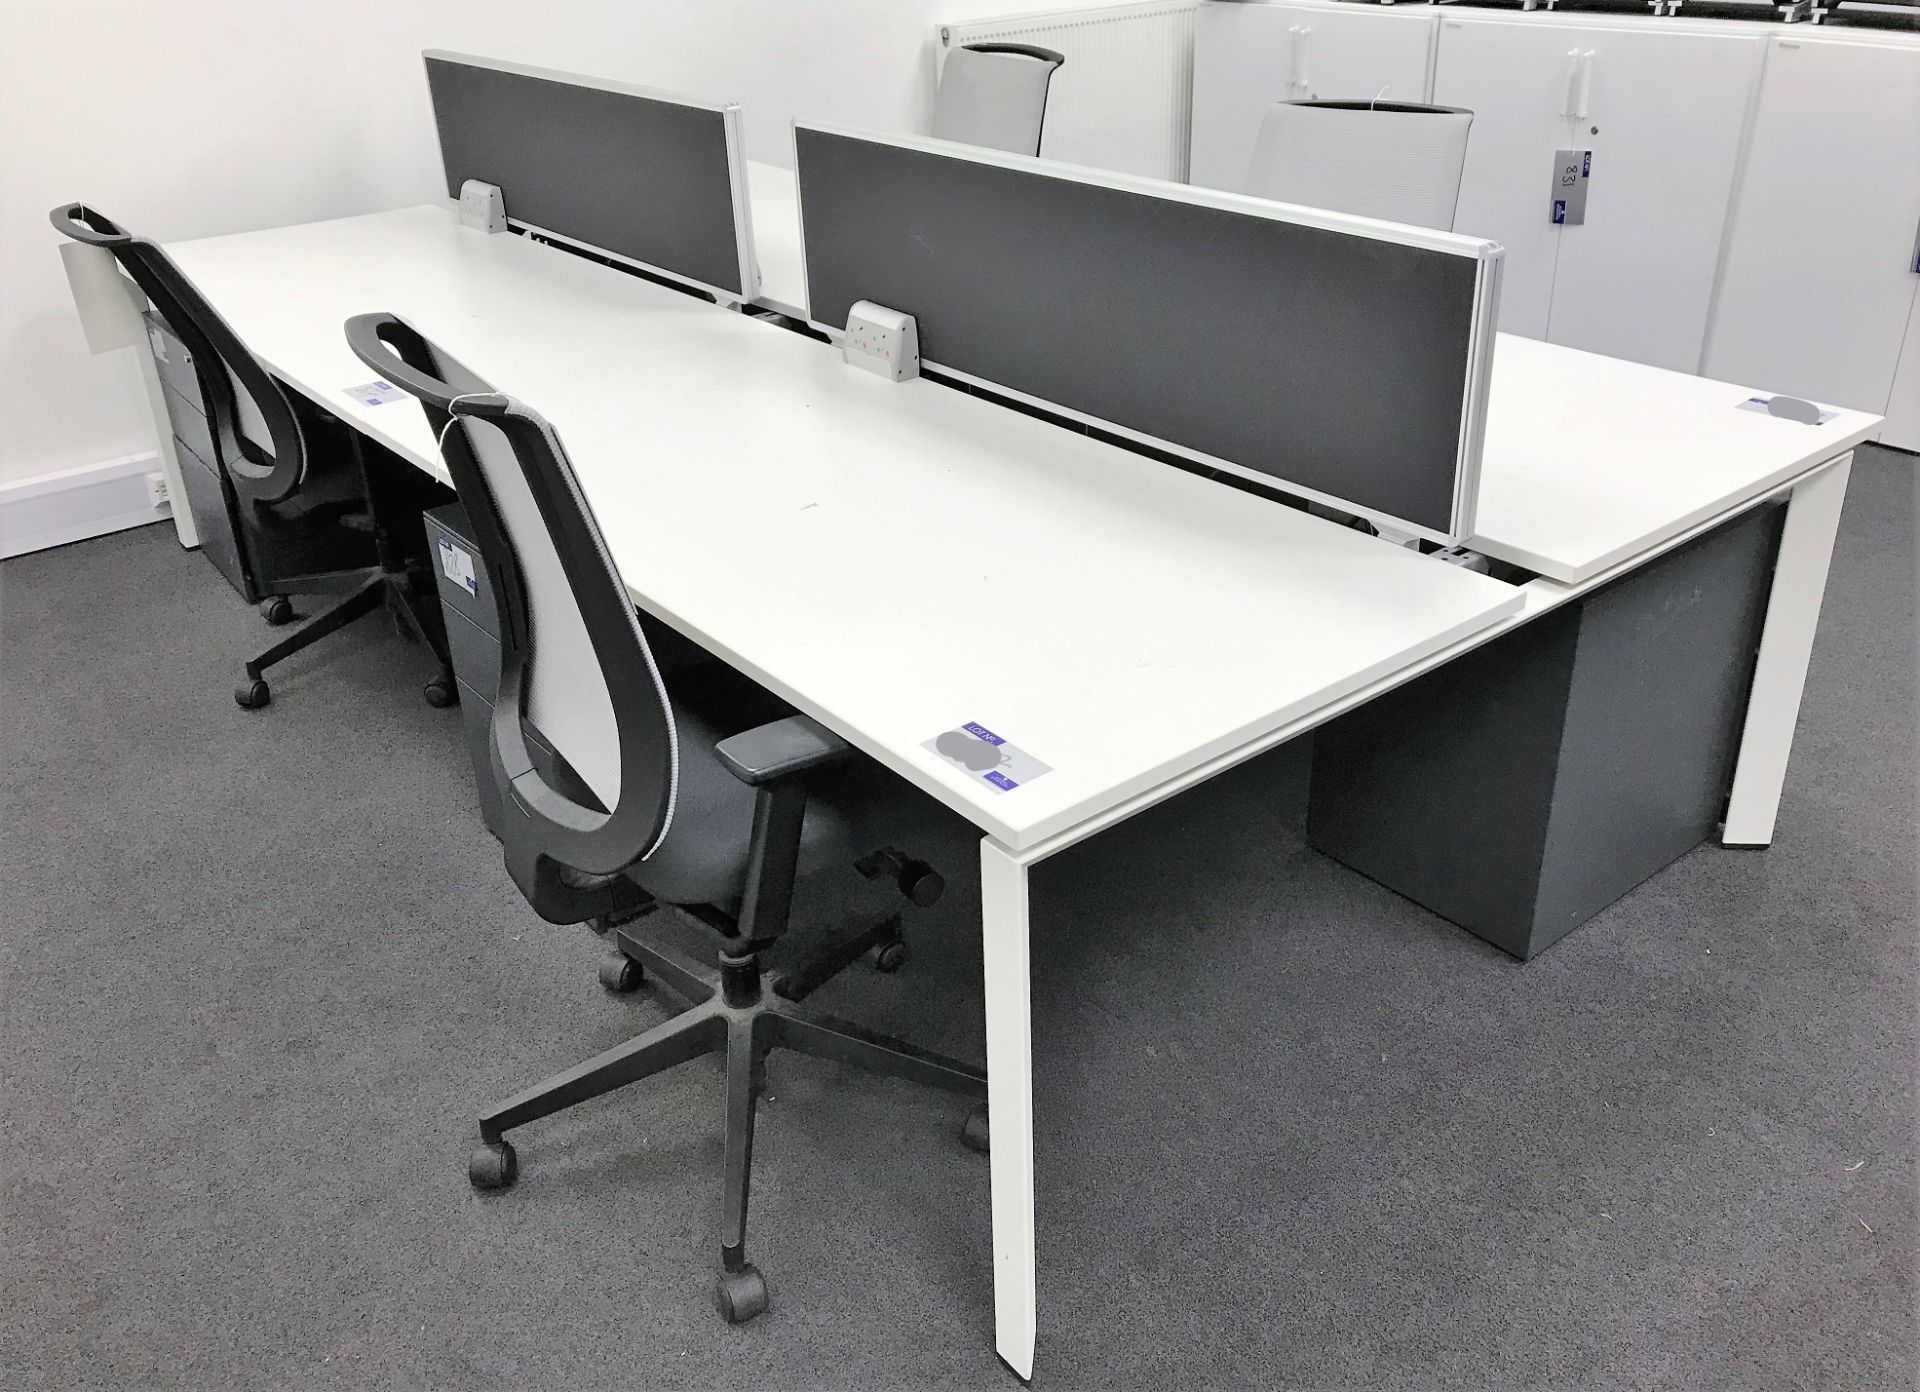 A Steelcase Model WP3G12801 4 position Modular Workstation with 2 Dividers, Integral Cable Trays, - Image 2 of 2